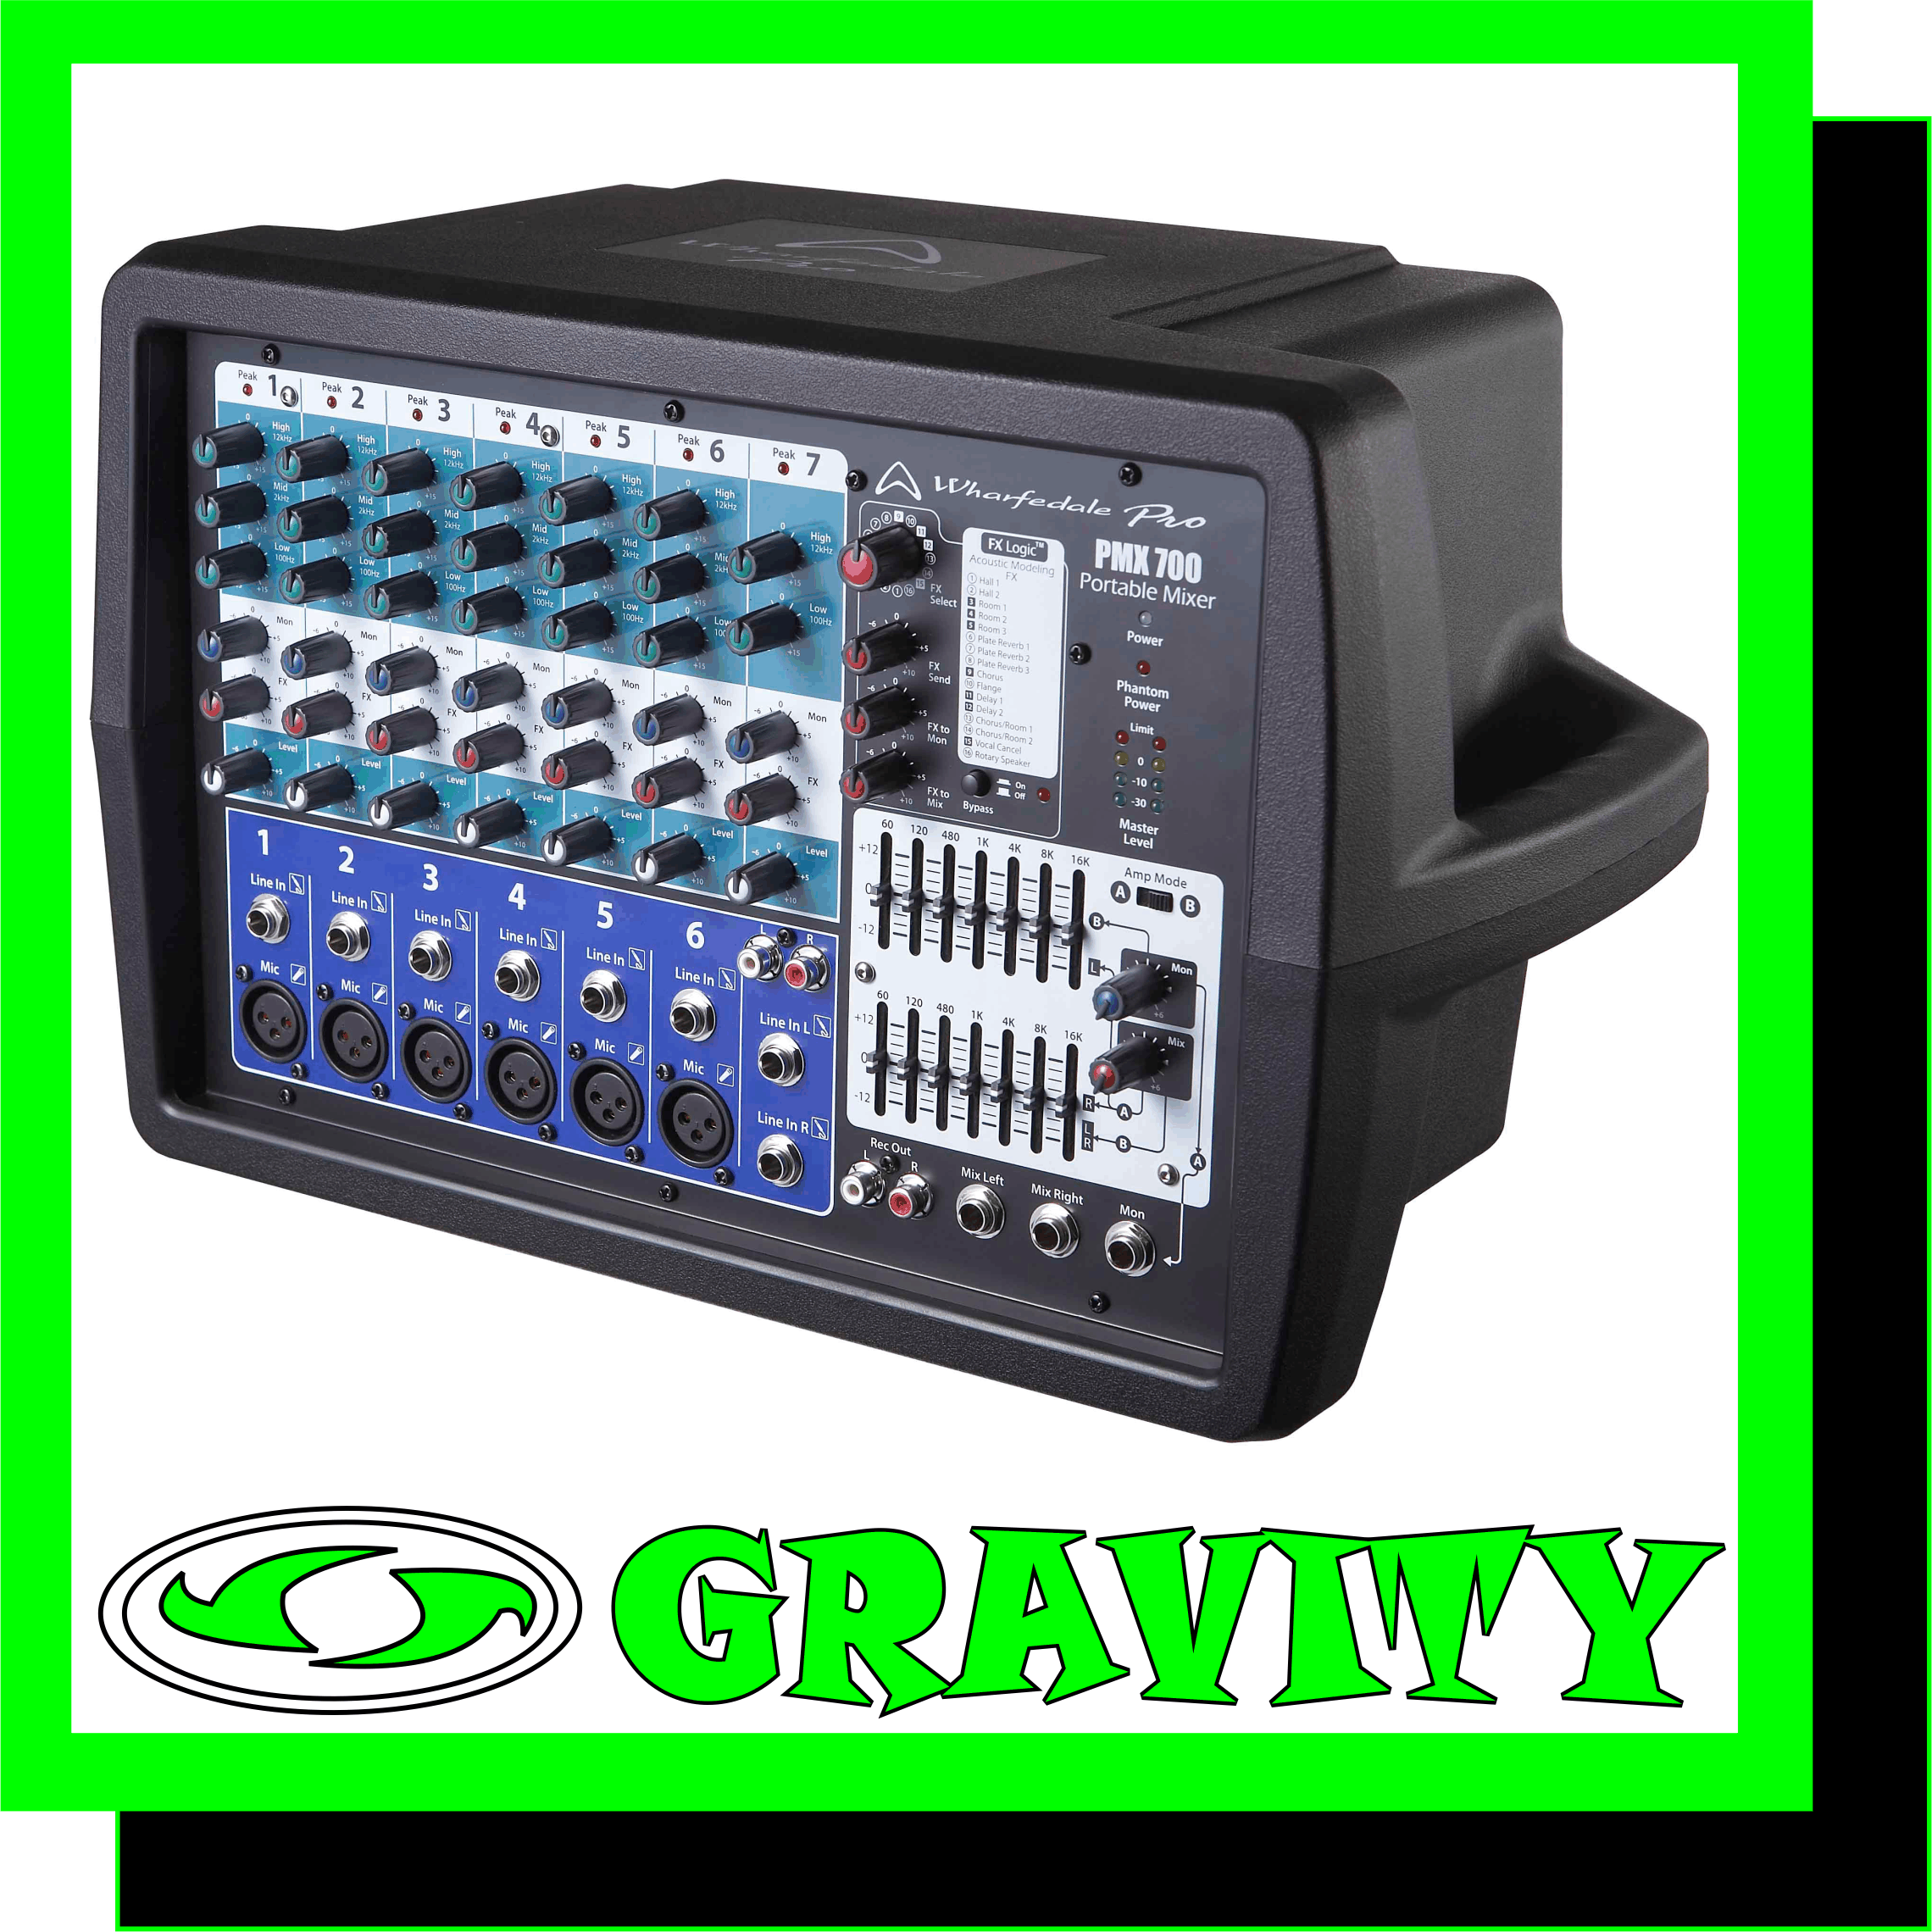 PMX 700  Key Features  -2 x 150W RMS -Lightweight Class-D Amplifier Modules -Lightweight, High-Efficiency Switch-Mode Power Supplies -Phantom Powered Balanced XLR Mic Inputs -¼” Jack and RCA Line Level Inputs -Peak Indicator for Each Channel -3-Band EQ on Every Channel -Built-in Digital FX -Clip LED display -7-Band Graphic EQ on Master Section -4 Segment LED Metering -Jack / Speakon Outputs  The PMX 700 from Wharfedale Pro is a class-leading lightweight, compact and portable powered mixer. Class D amplification technology means the amplifier is portable yet powerful with built-in digital FX this is a time and space saving powered mixer perfect for the mobile performer.